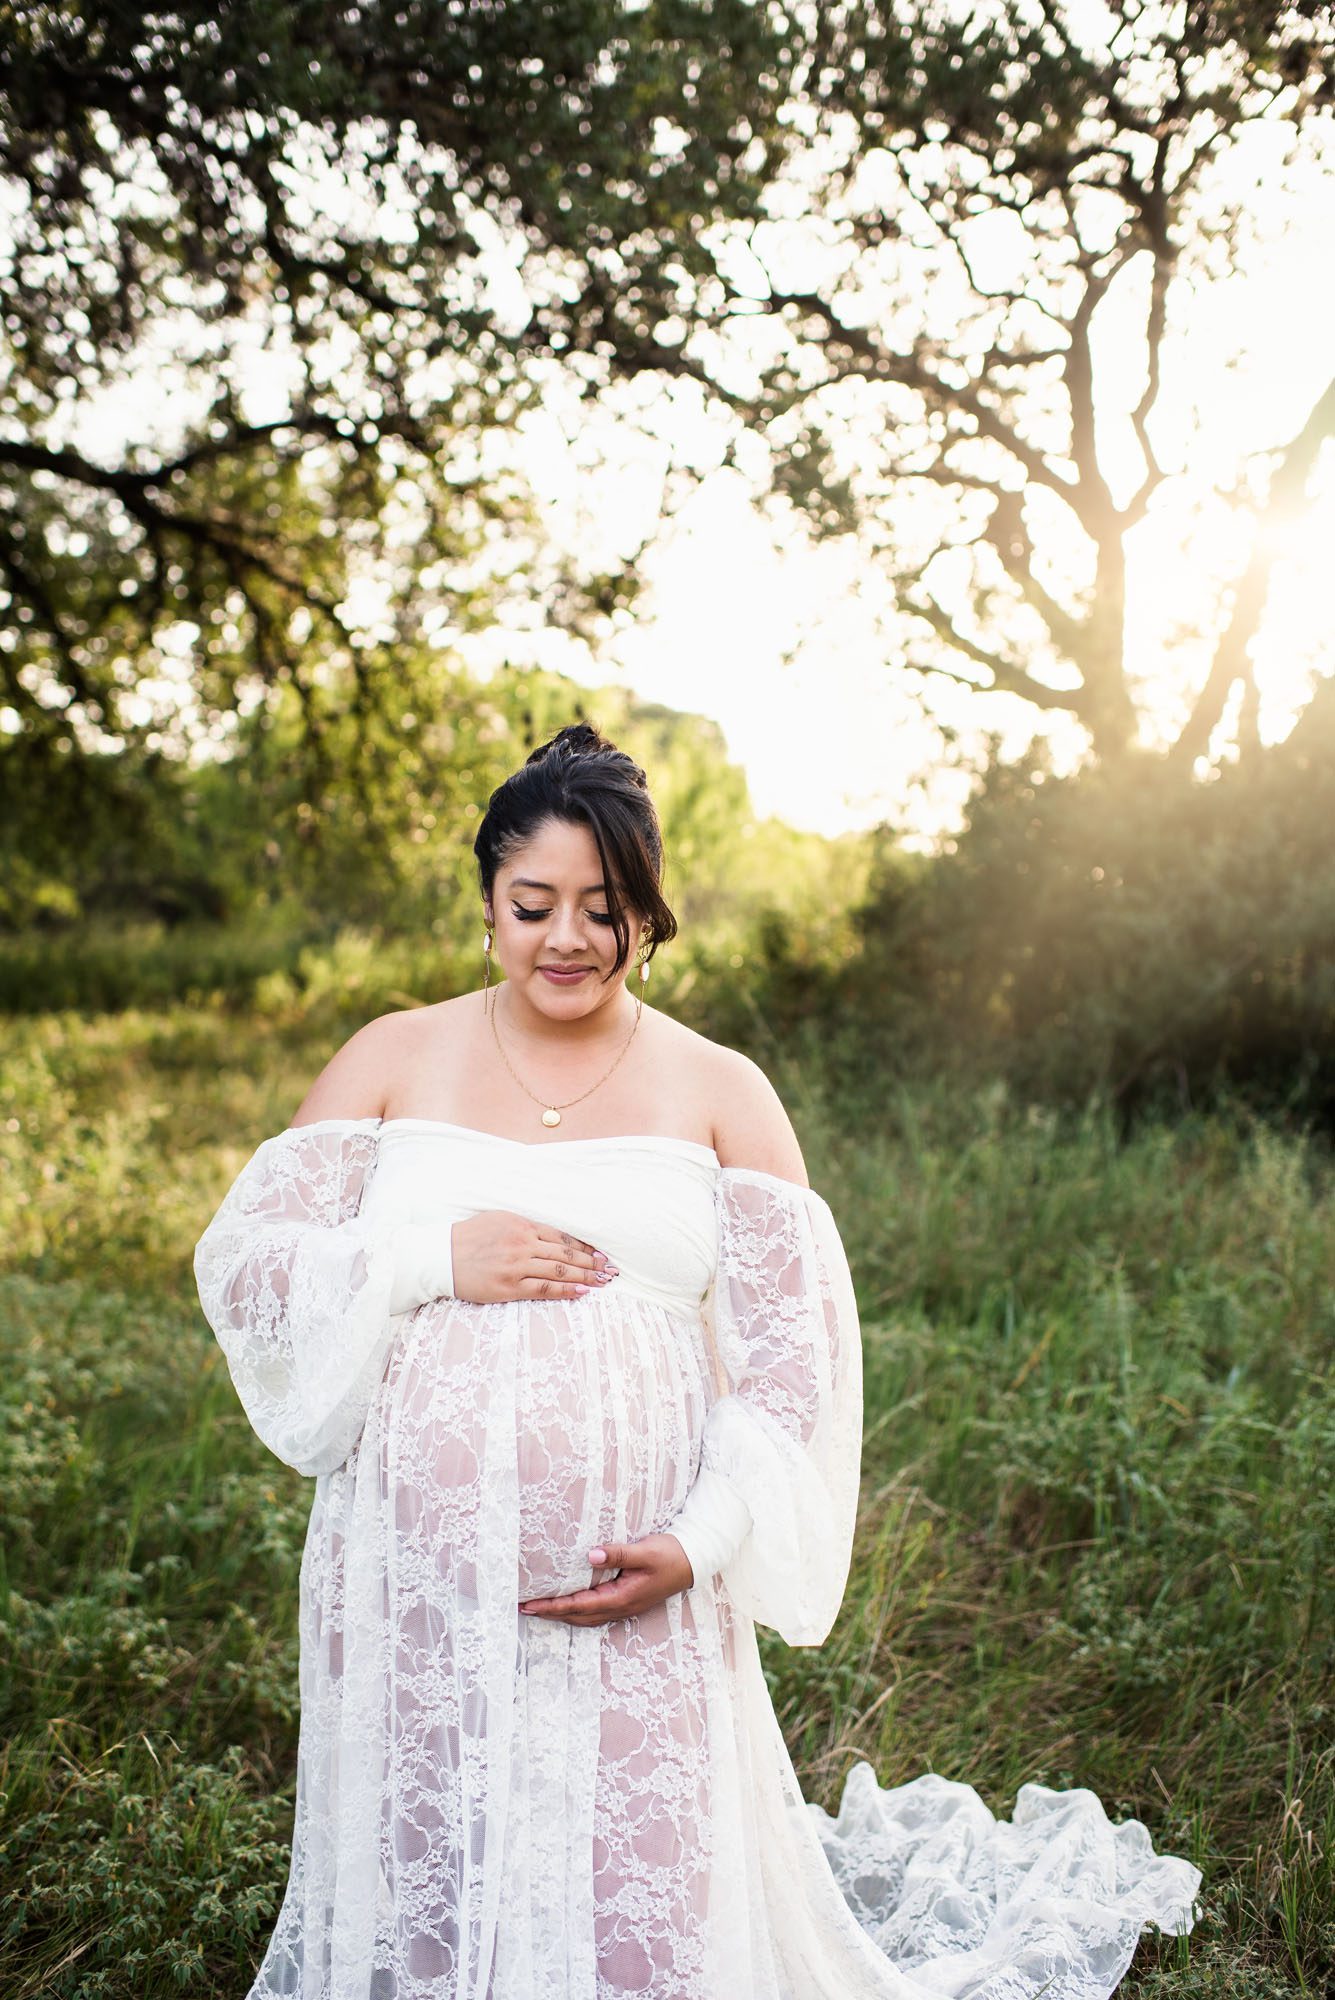 San Antonio Maternity Photographer, Pregnant woman in white lace dress looking at her belly